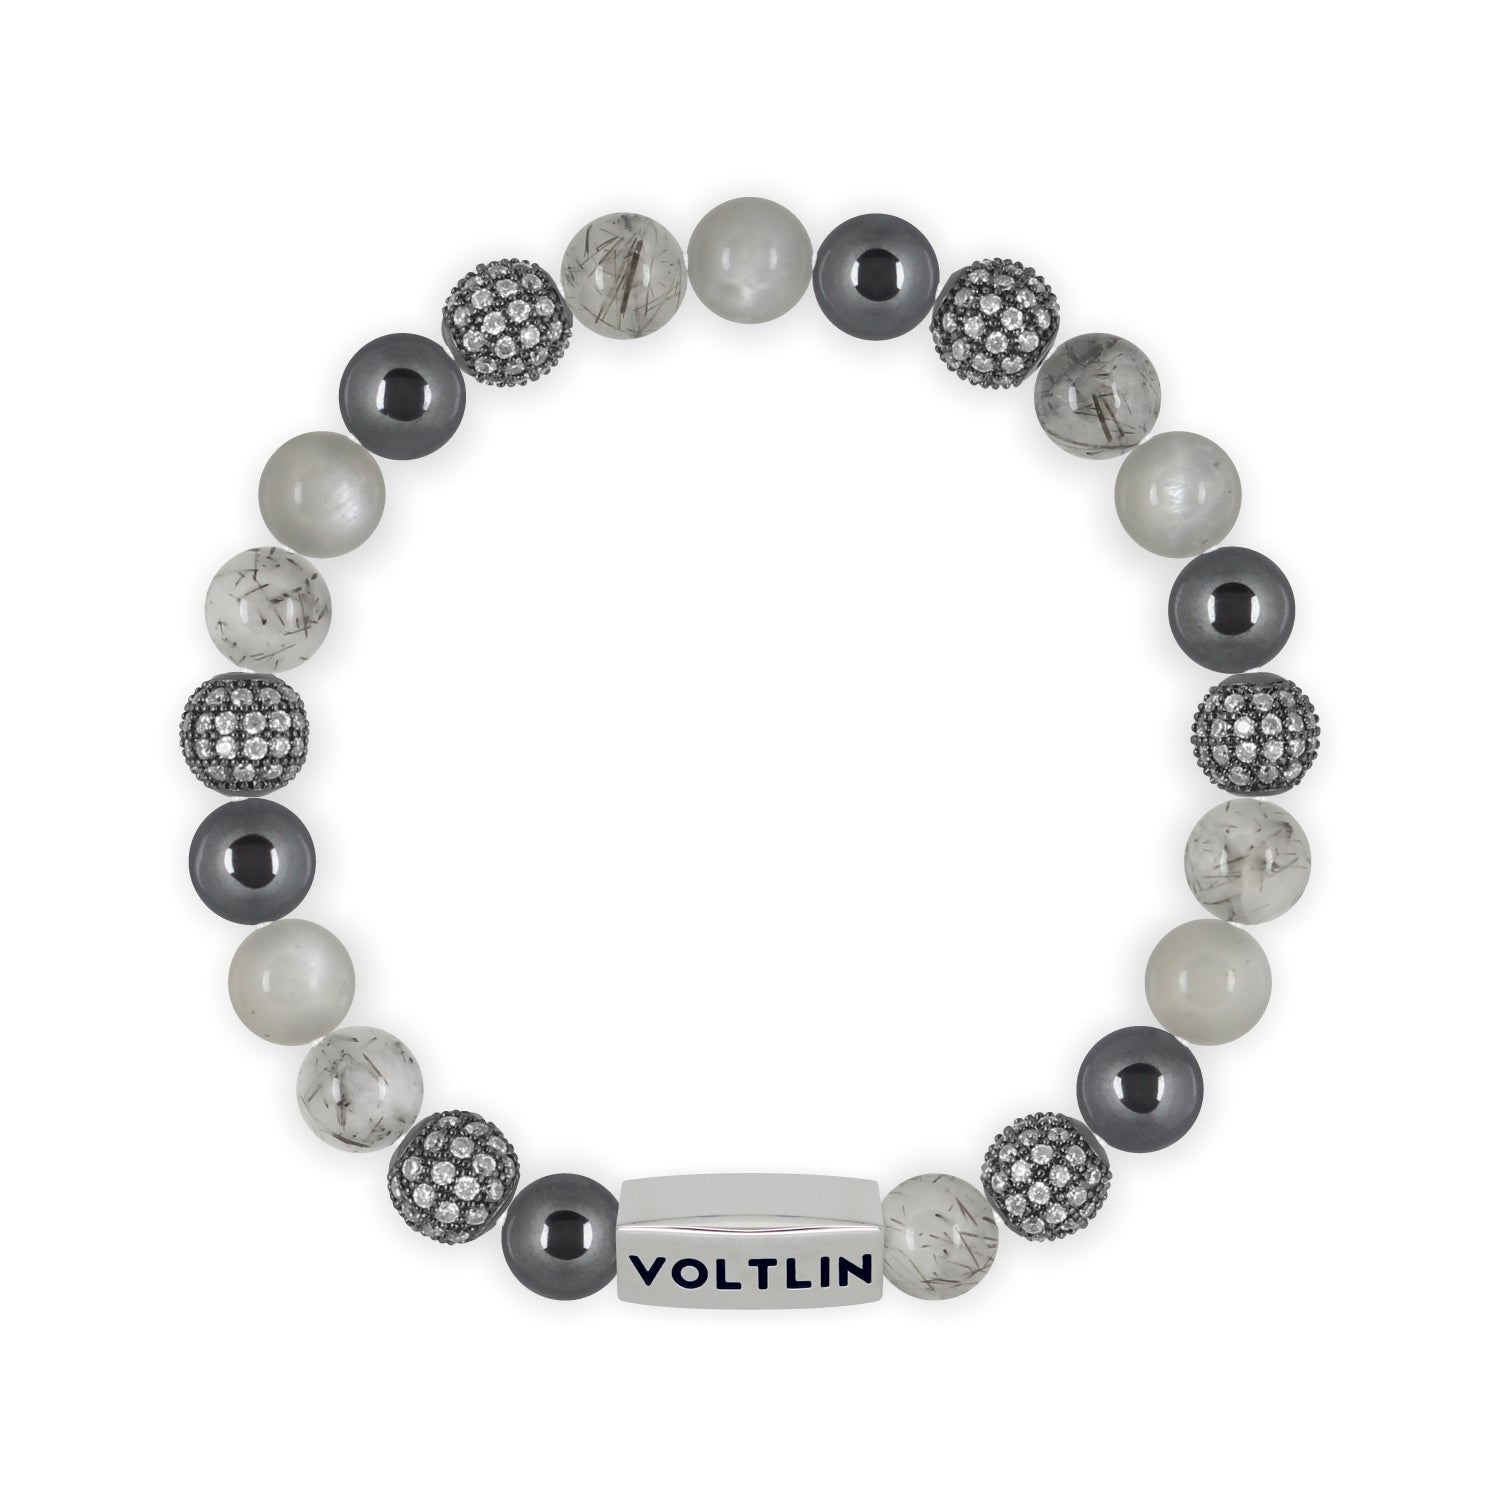 Front view of an 8mm Gray Sirius beaded stretch bracelet featuring Hematite, Steel Pave, Tourmalinated Quartz, & Moonstone crystal and silver stainless steel logo bead made by Voltlin